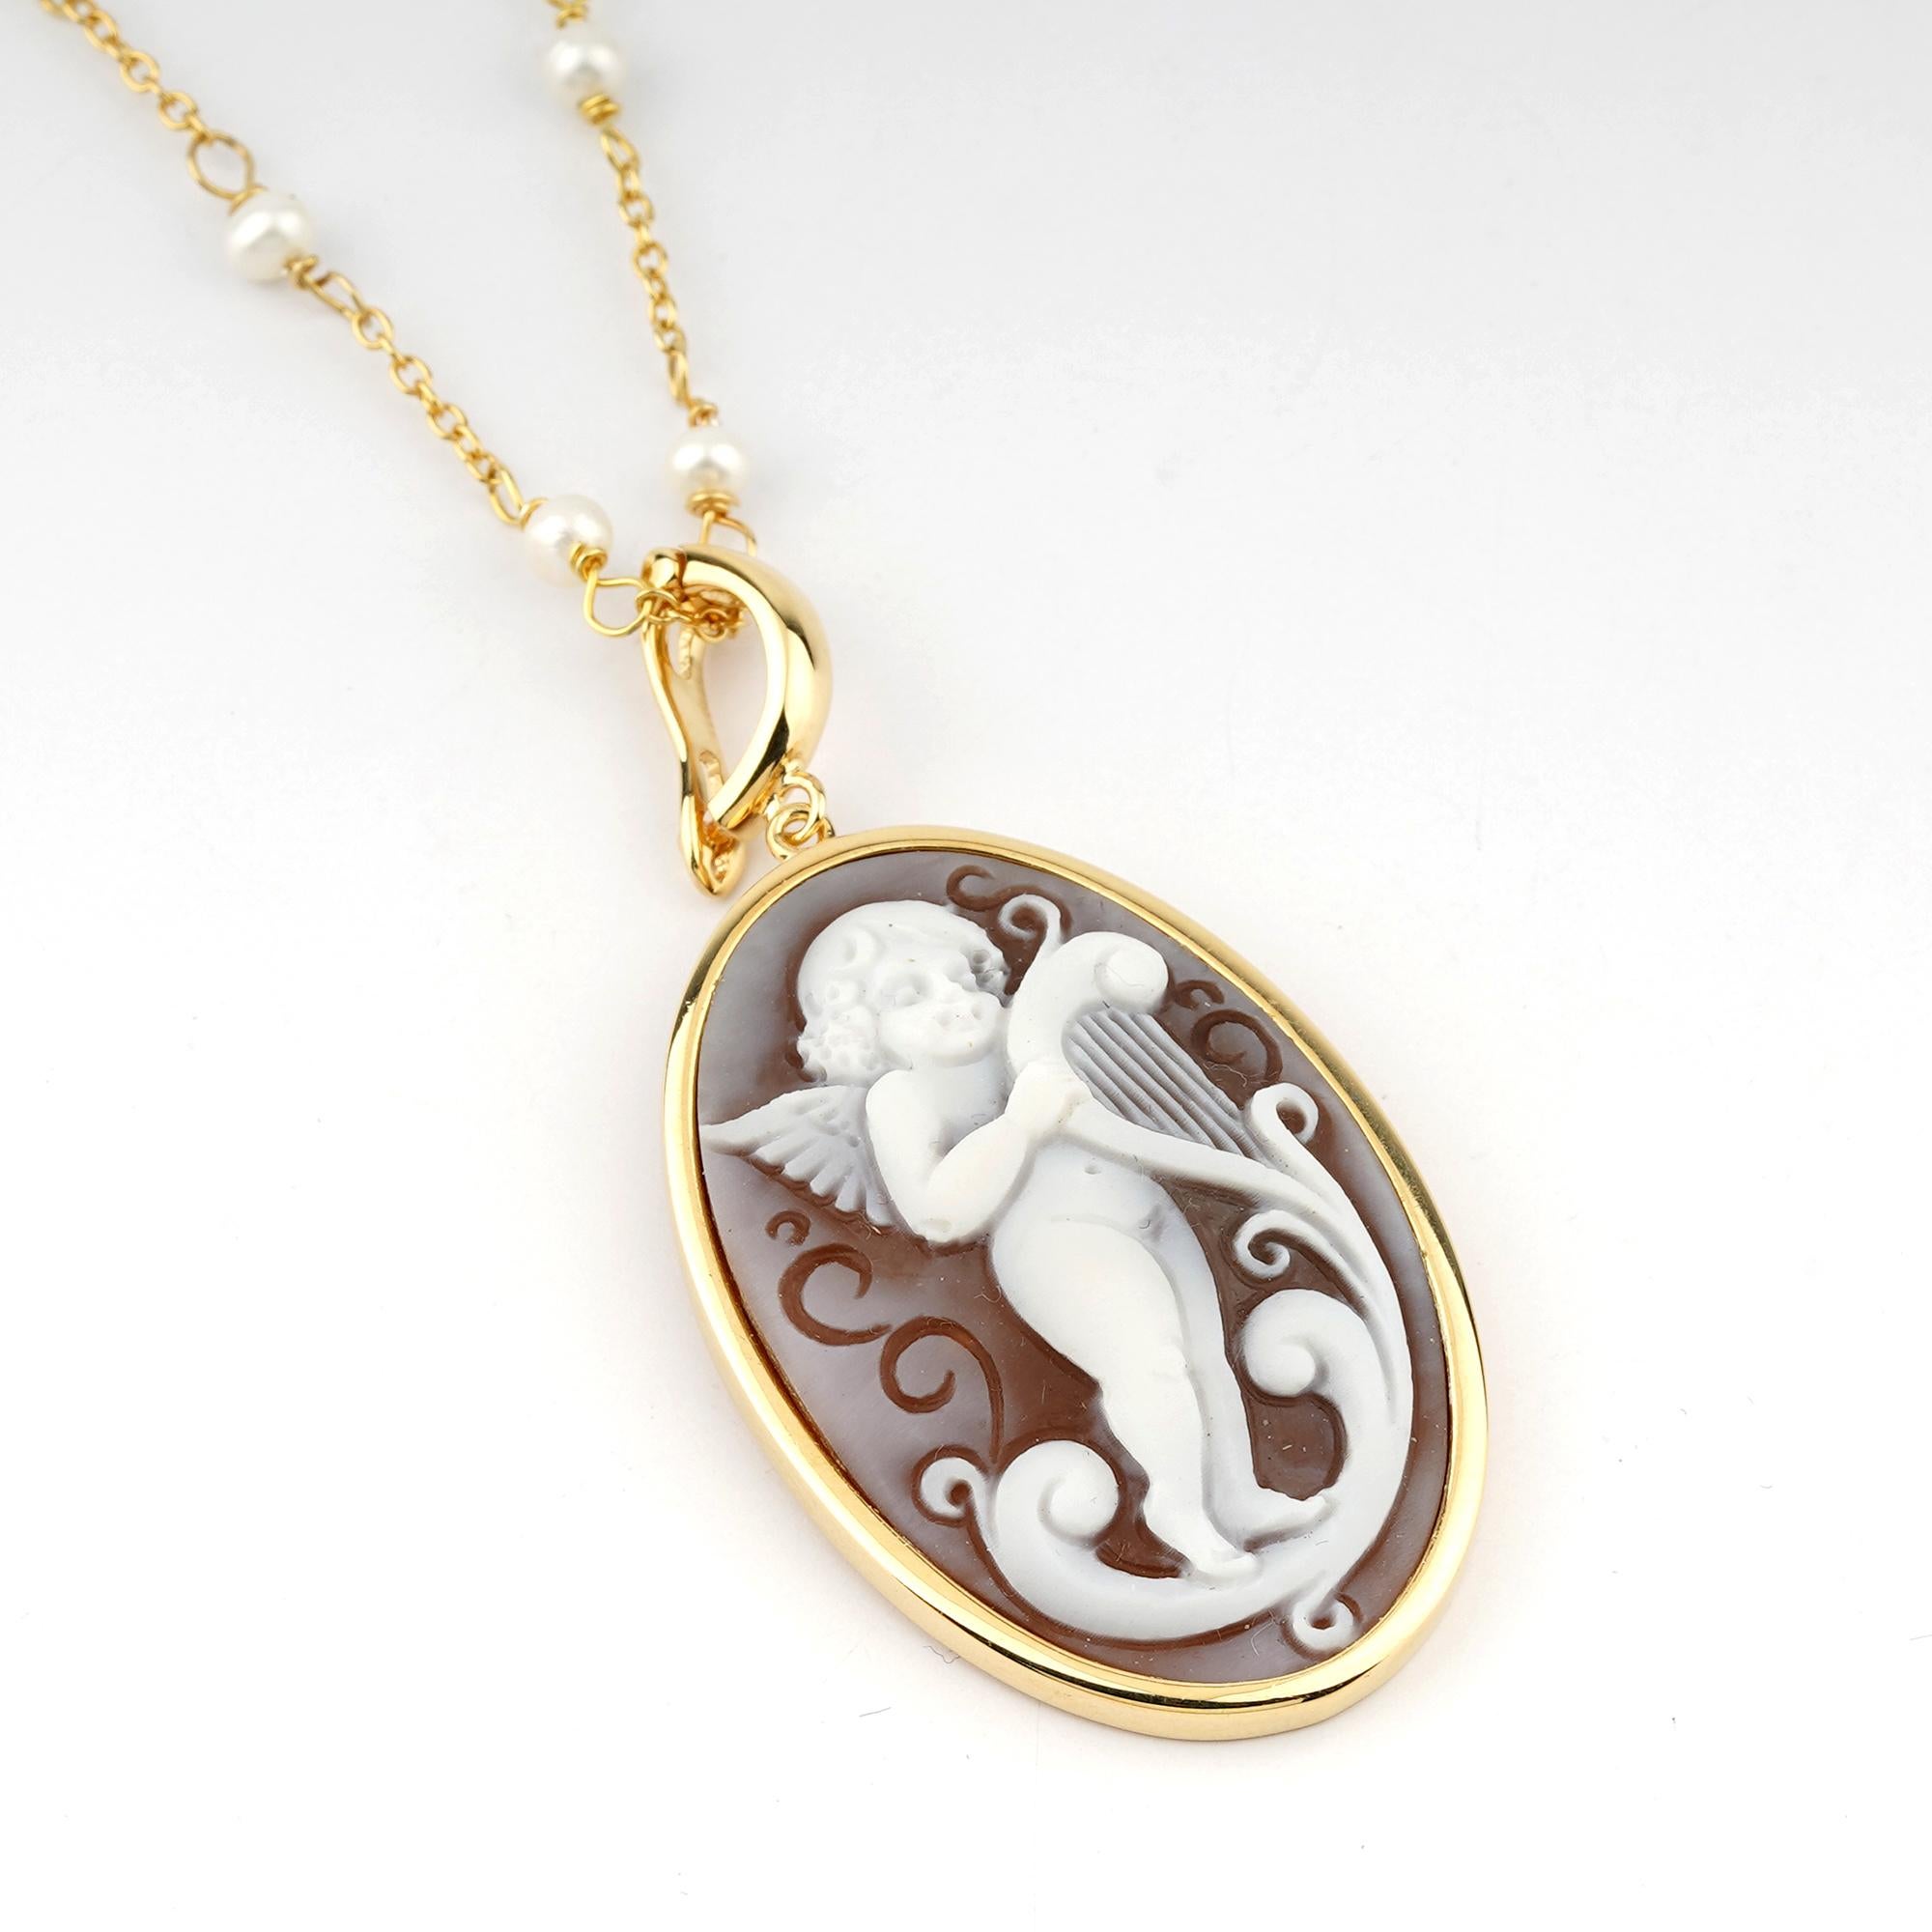 18 carat Gold Plated 925 Sterling Silver with 40mm Sea Shell Cameos Pendant Necklace. Fully handcarved Portrait on a sea shell cameo set in a 18kt Gold plated silver Pendant Necklace. Carvings are performed by our master artisans with generations of